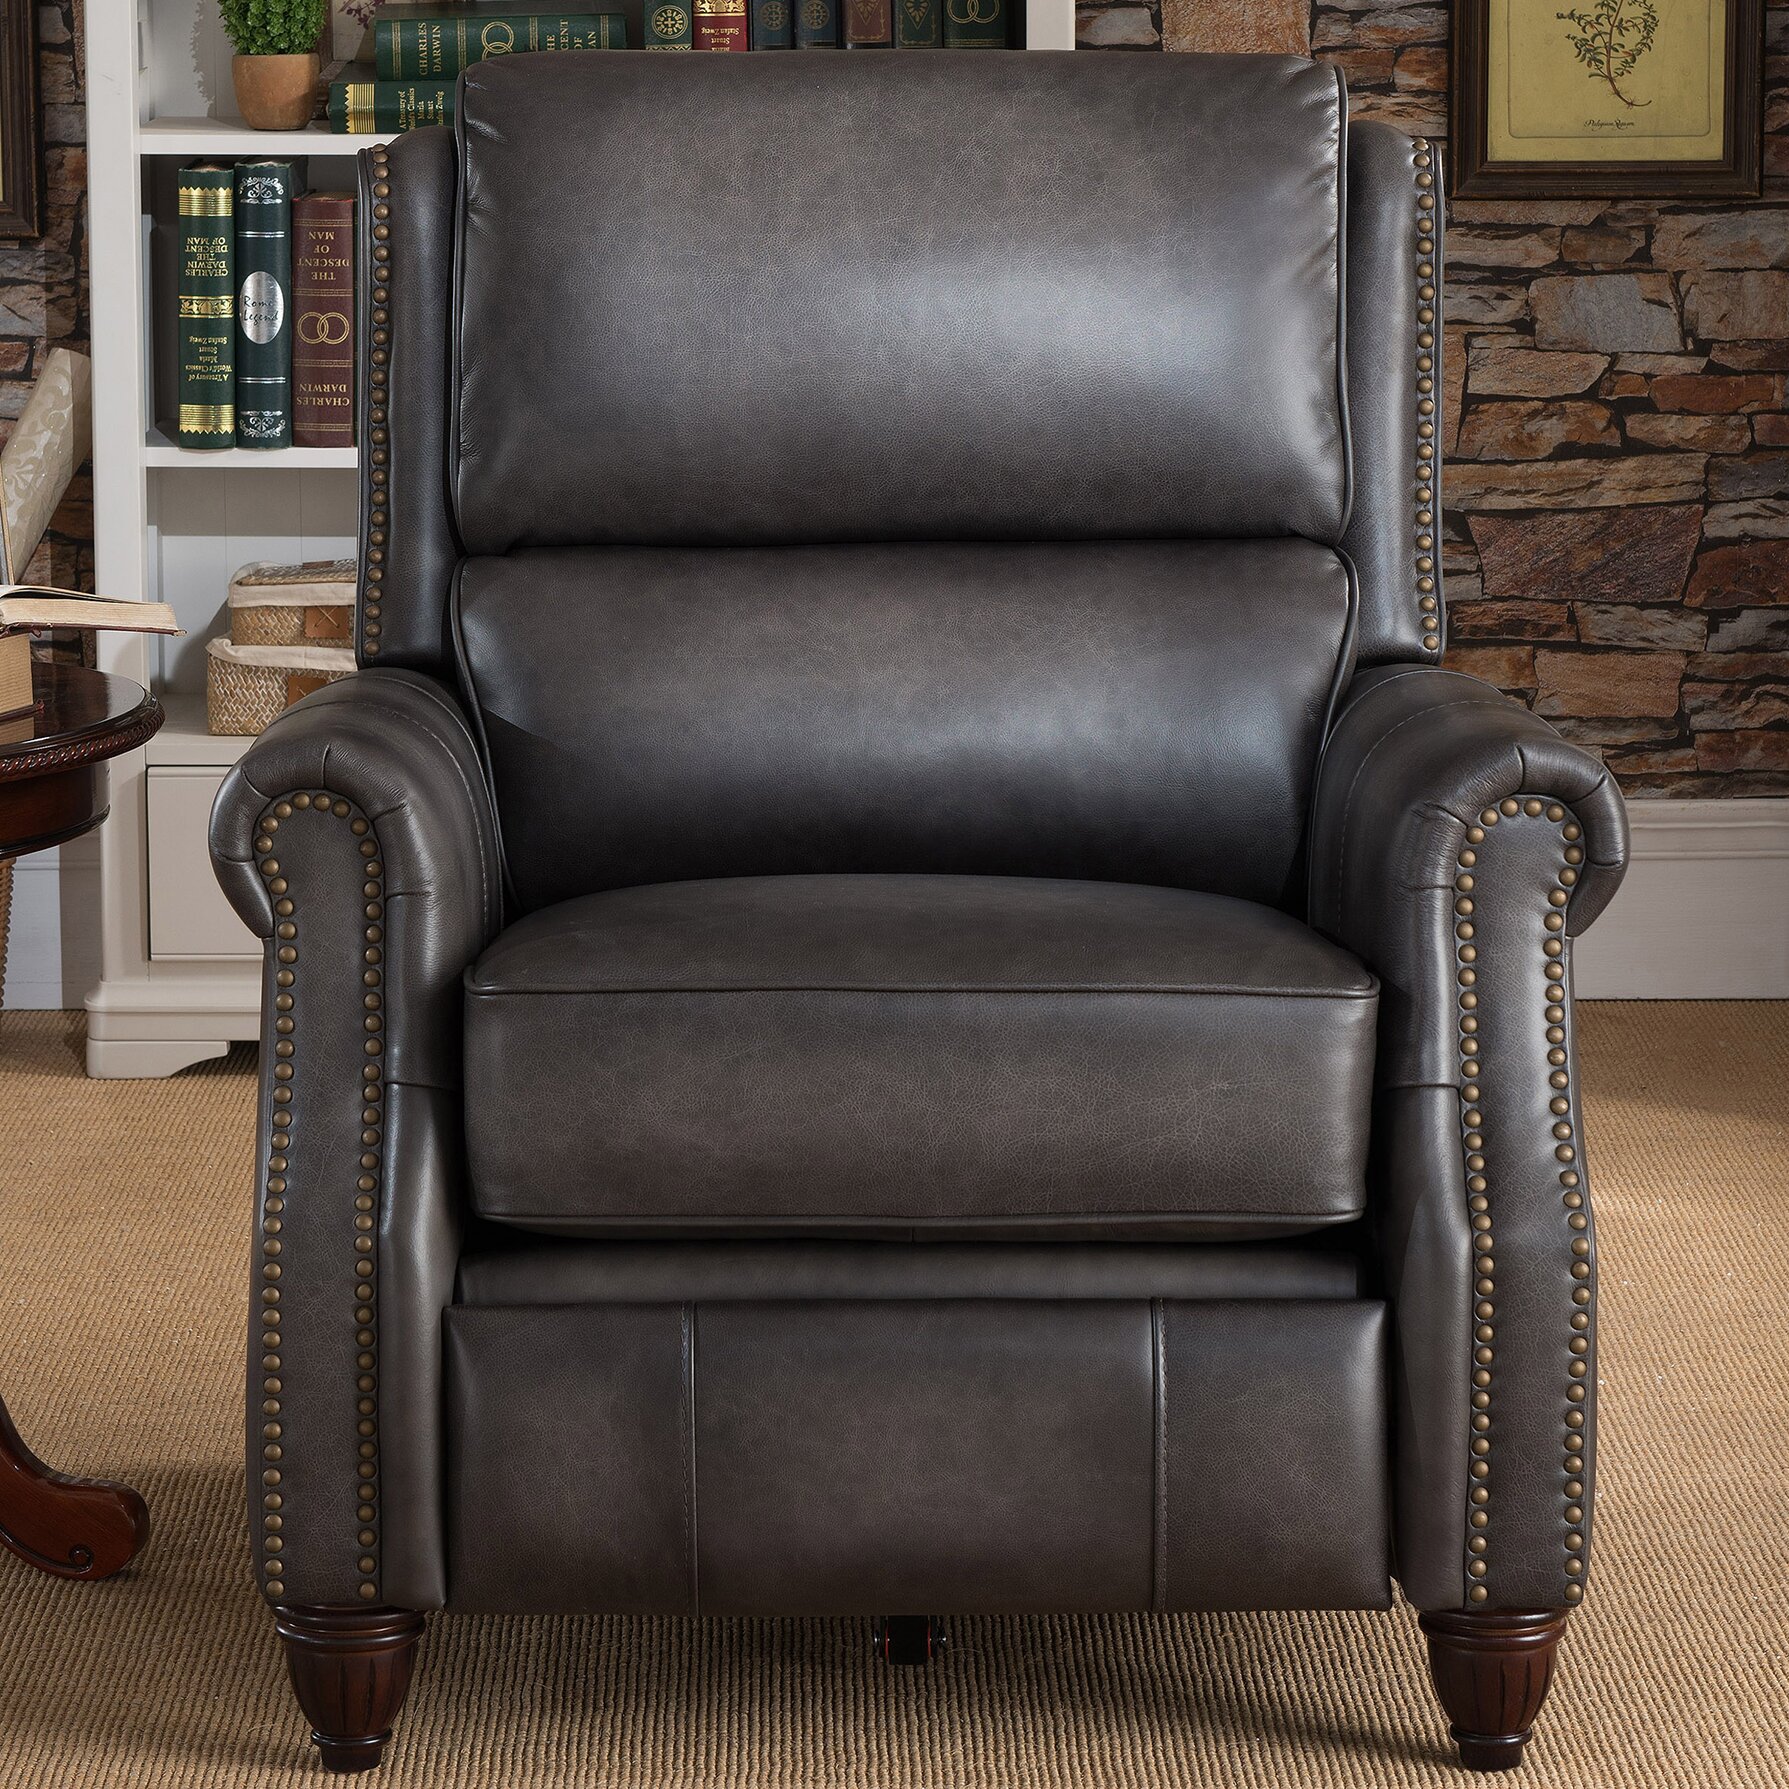 Amax Emery Leather Power Recliner with USB Port | Wayfair - Amax Emery Leather Power Recliner with USB Port